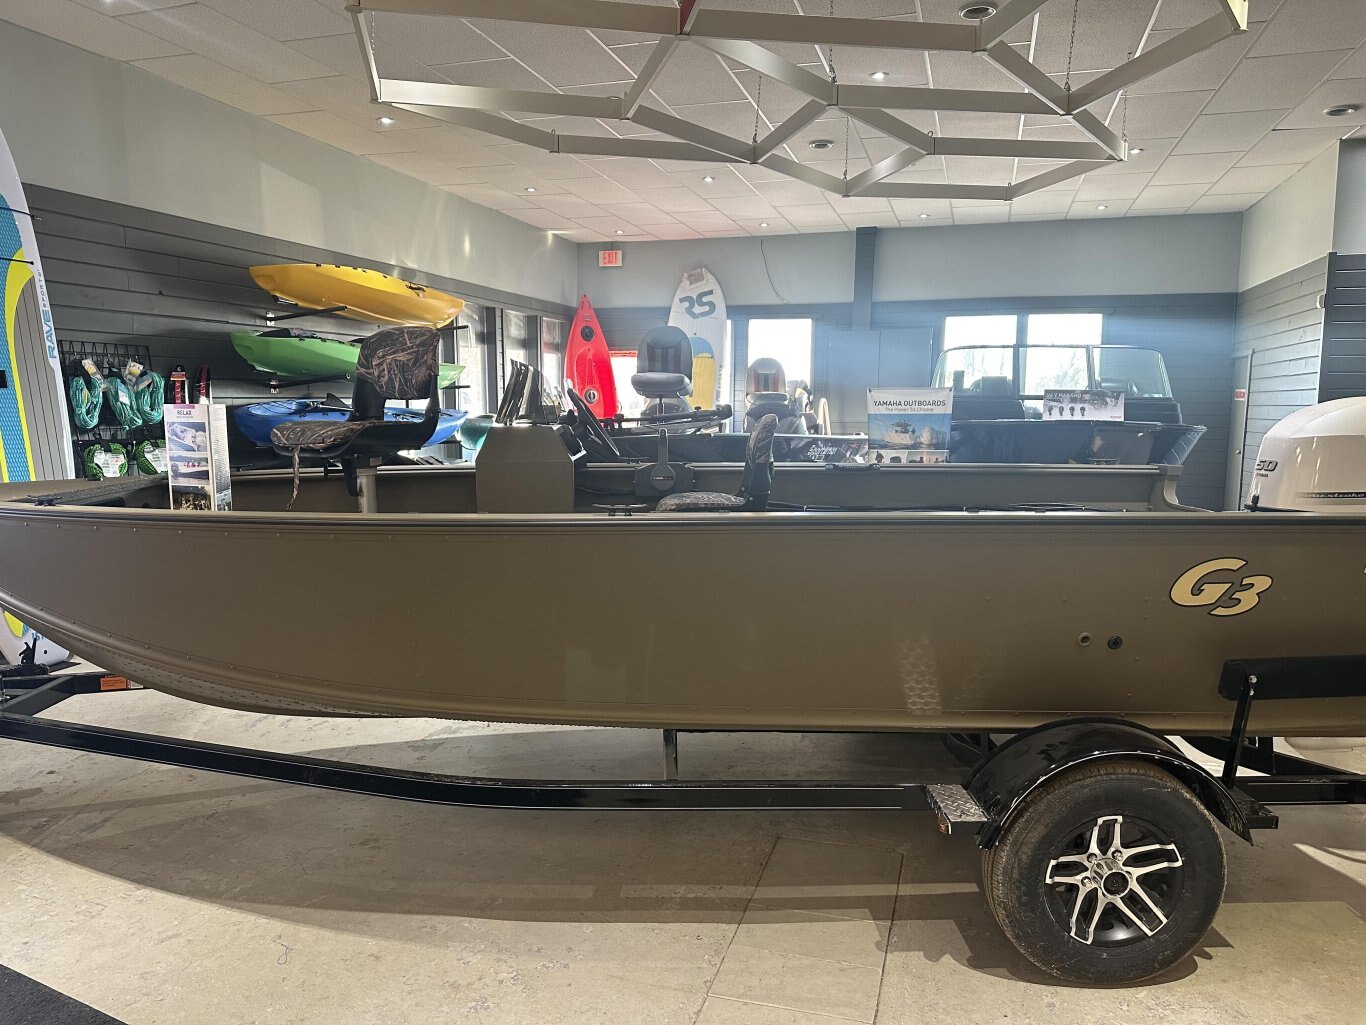 G3 Boats Outfitter V167 T